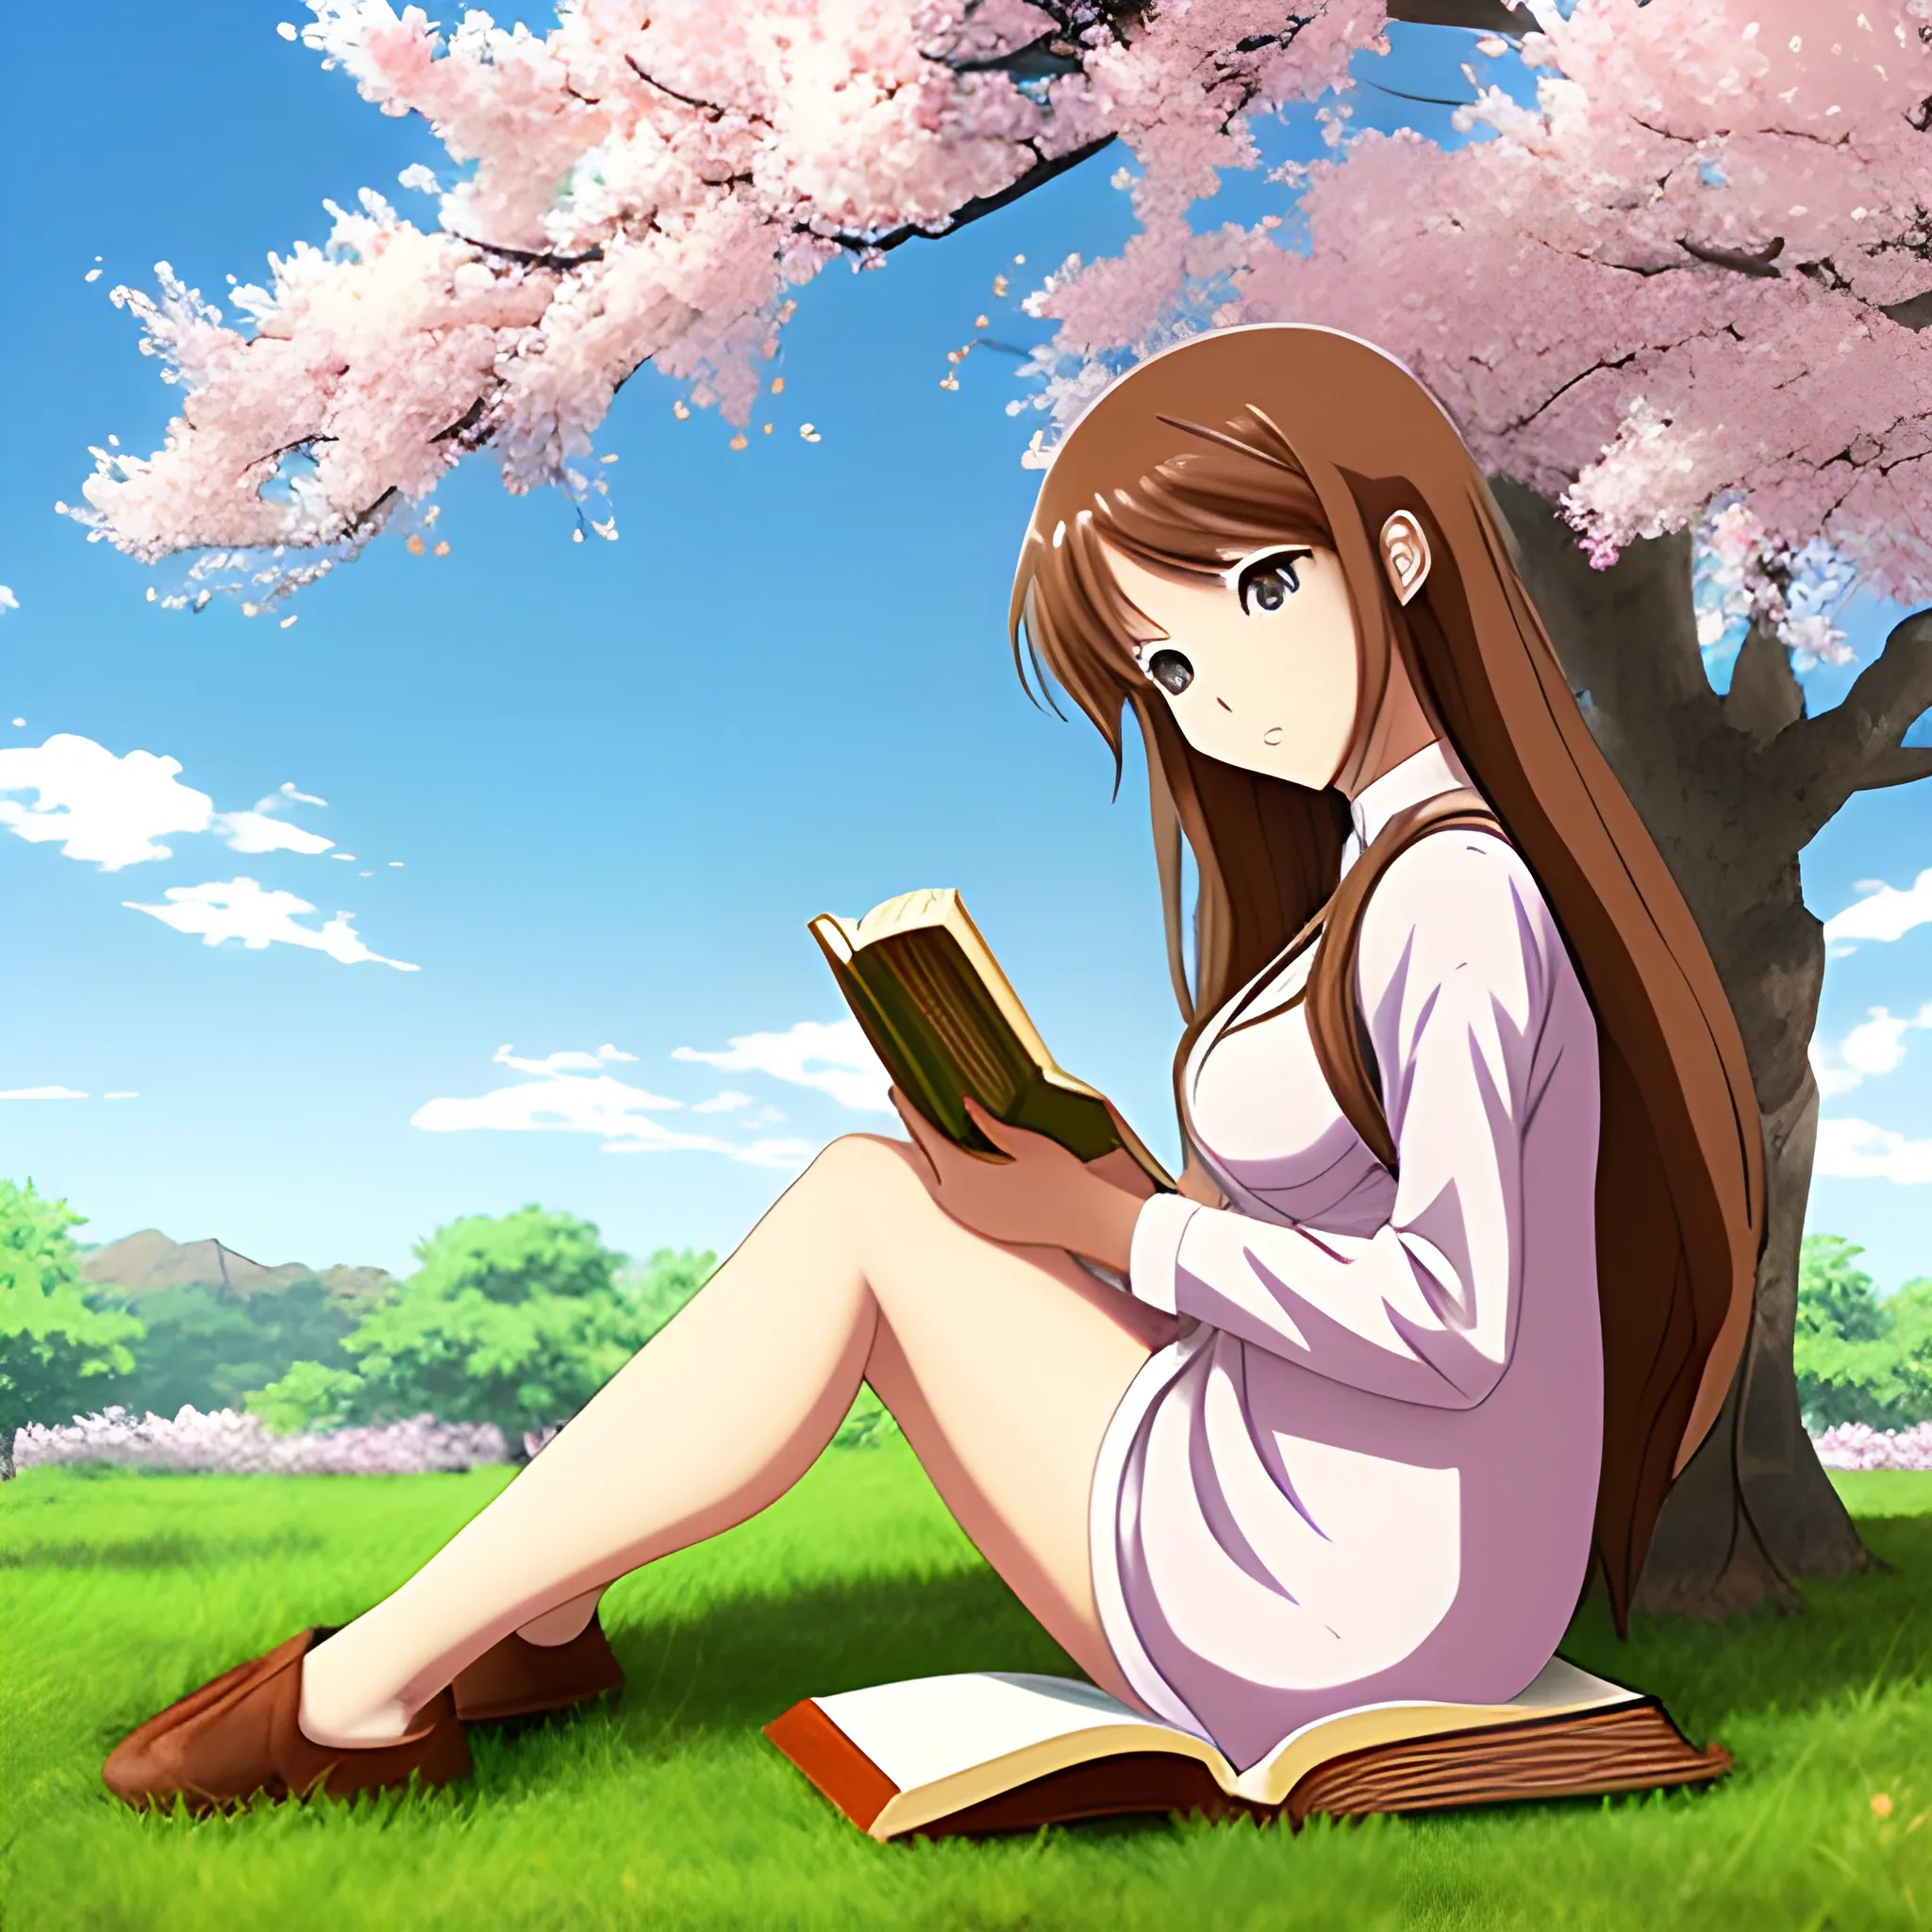 Anime woman sitting u see a blossom tree reading a book and she has brown hair 